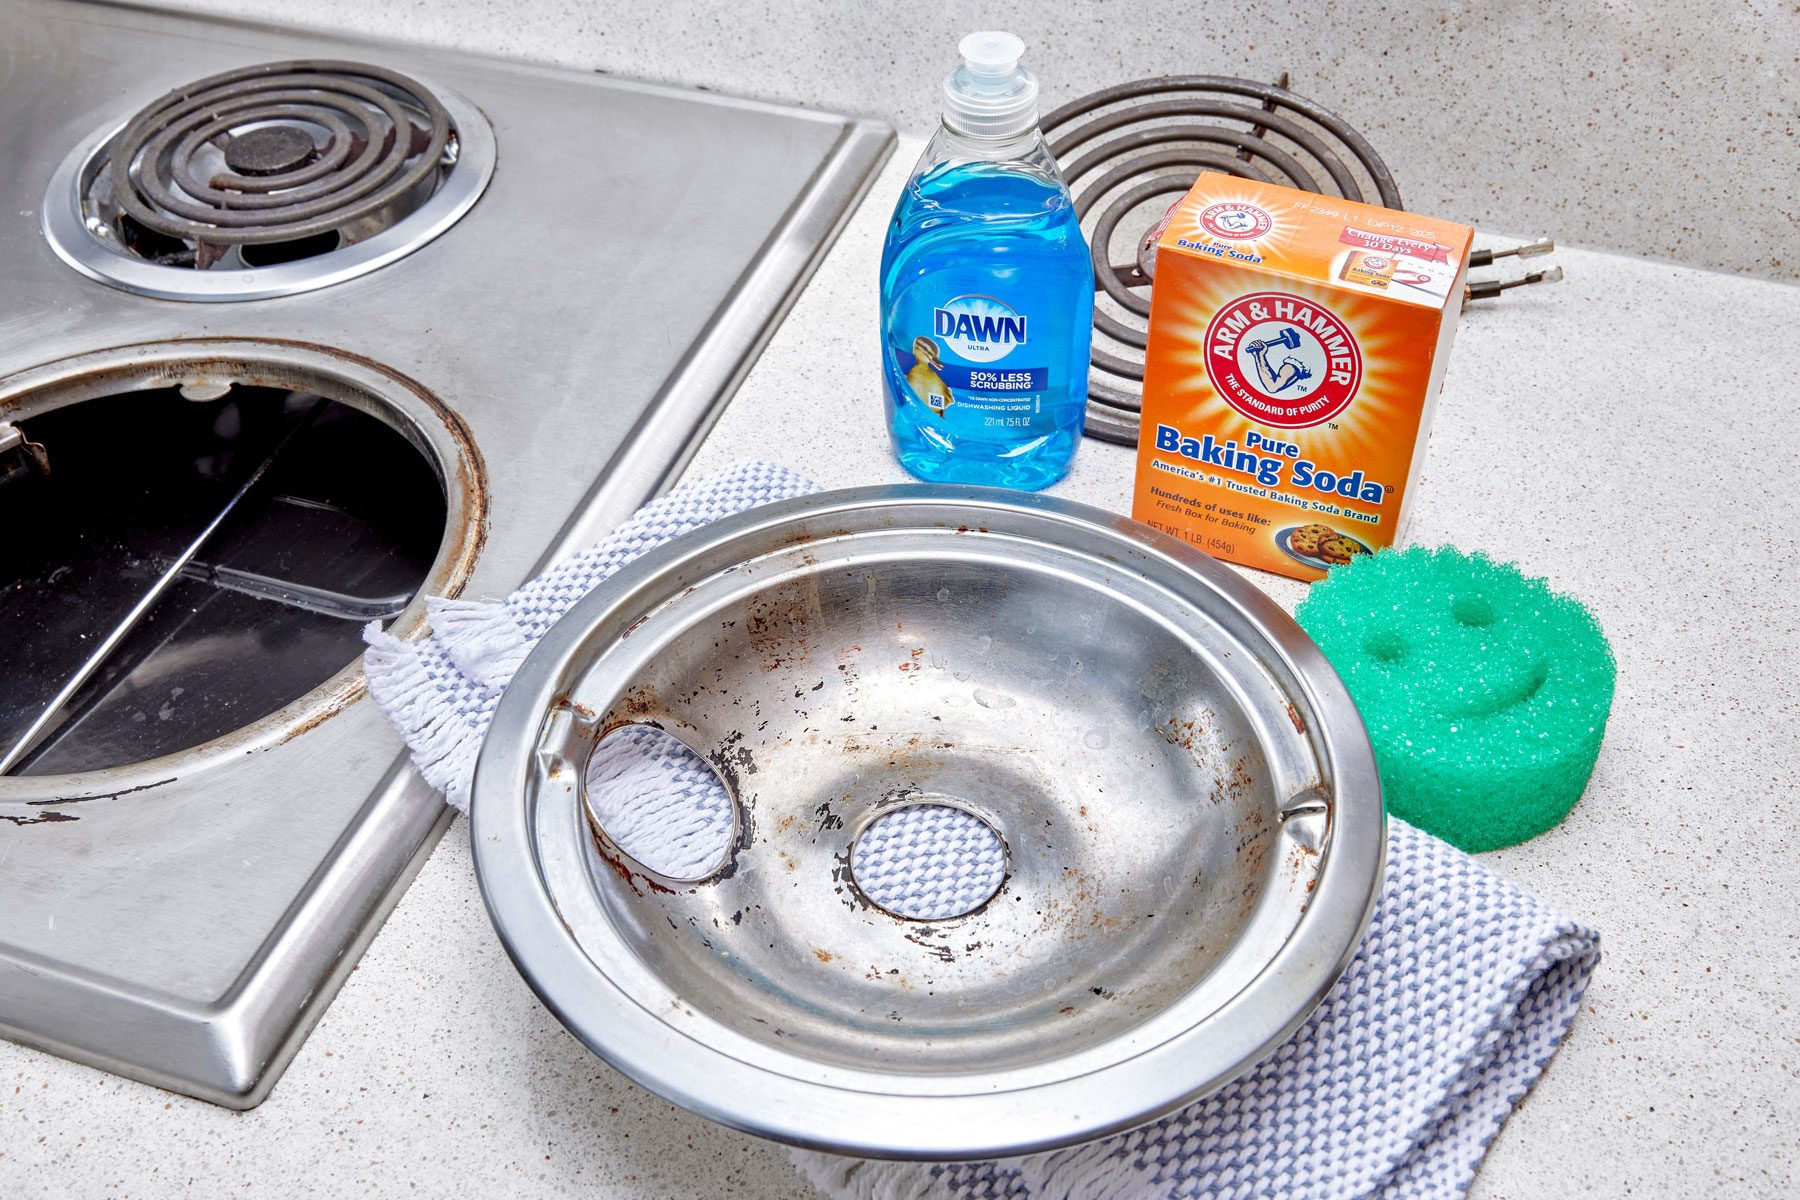 How to Remove and Clean Electric Stove Burners